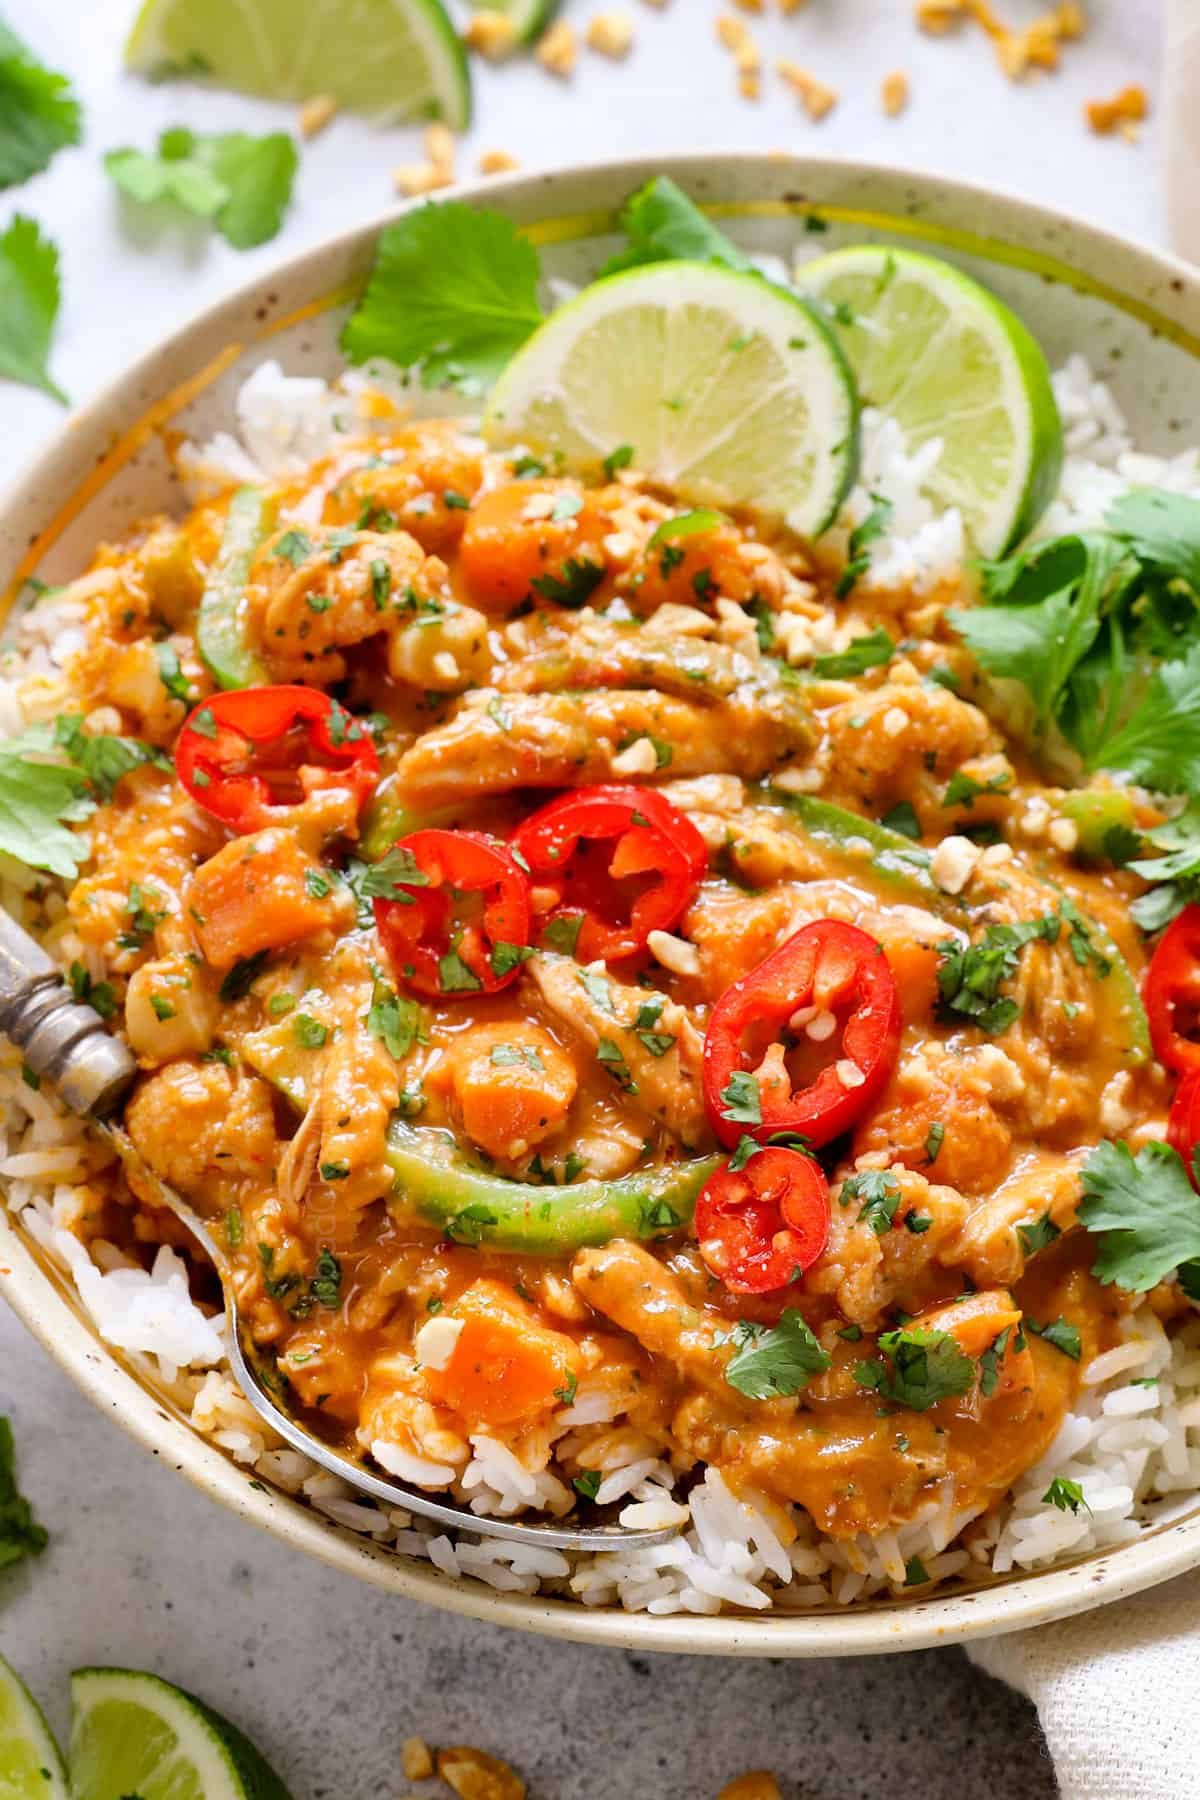 showing how to serve Thai crockpot coconut curry chicken by adding to a bowl with rice and garnishing with cilantro, limes, red chilies